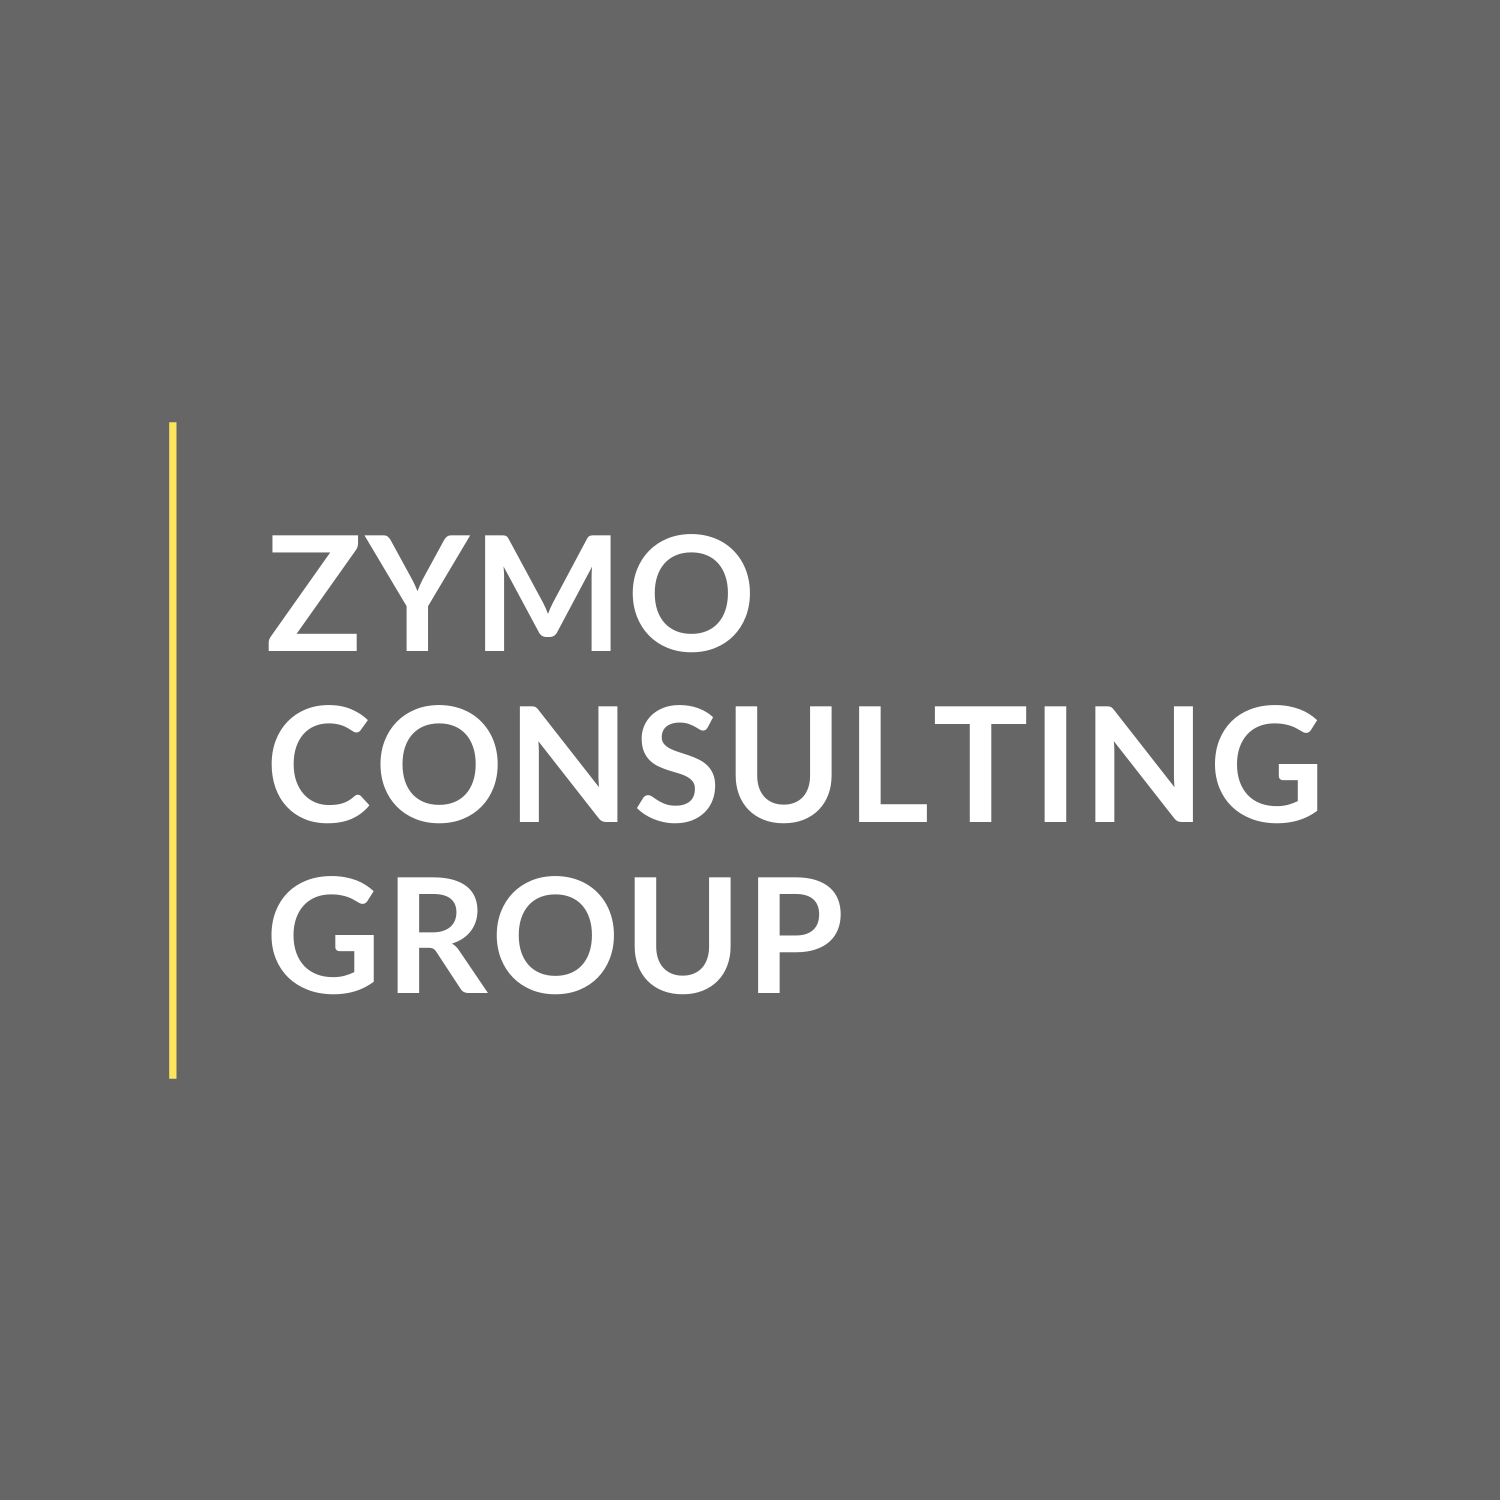 Zymo Consulting Group 